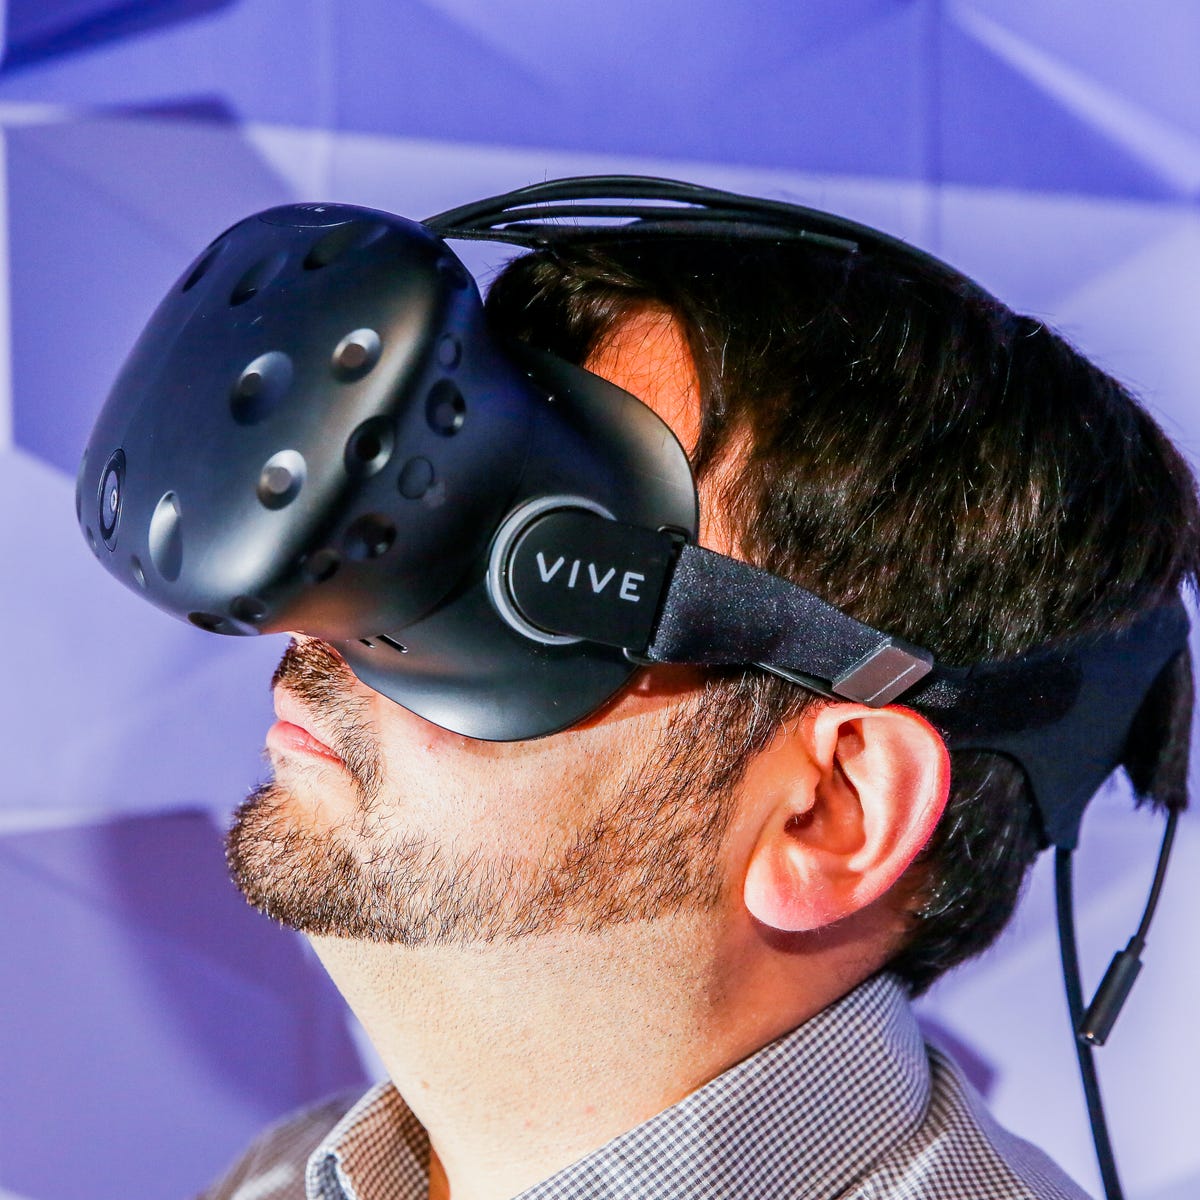 Databasen Ligegyldighed spændende HTC Vive review: The best VR experience you can have right now, if you've  got the space - CNET